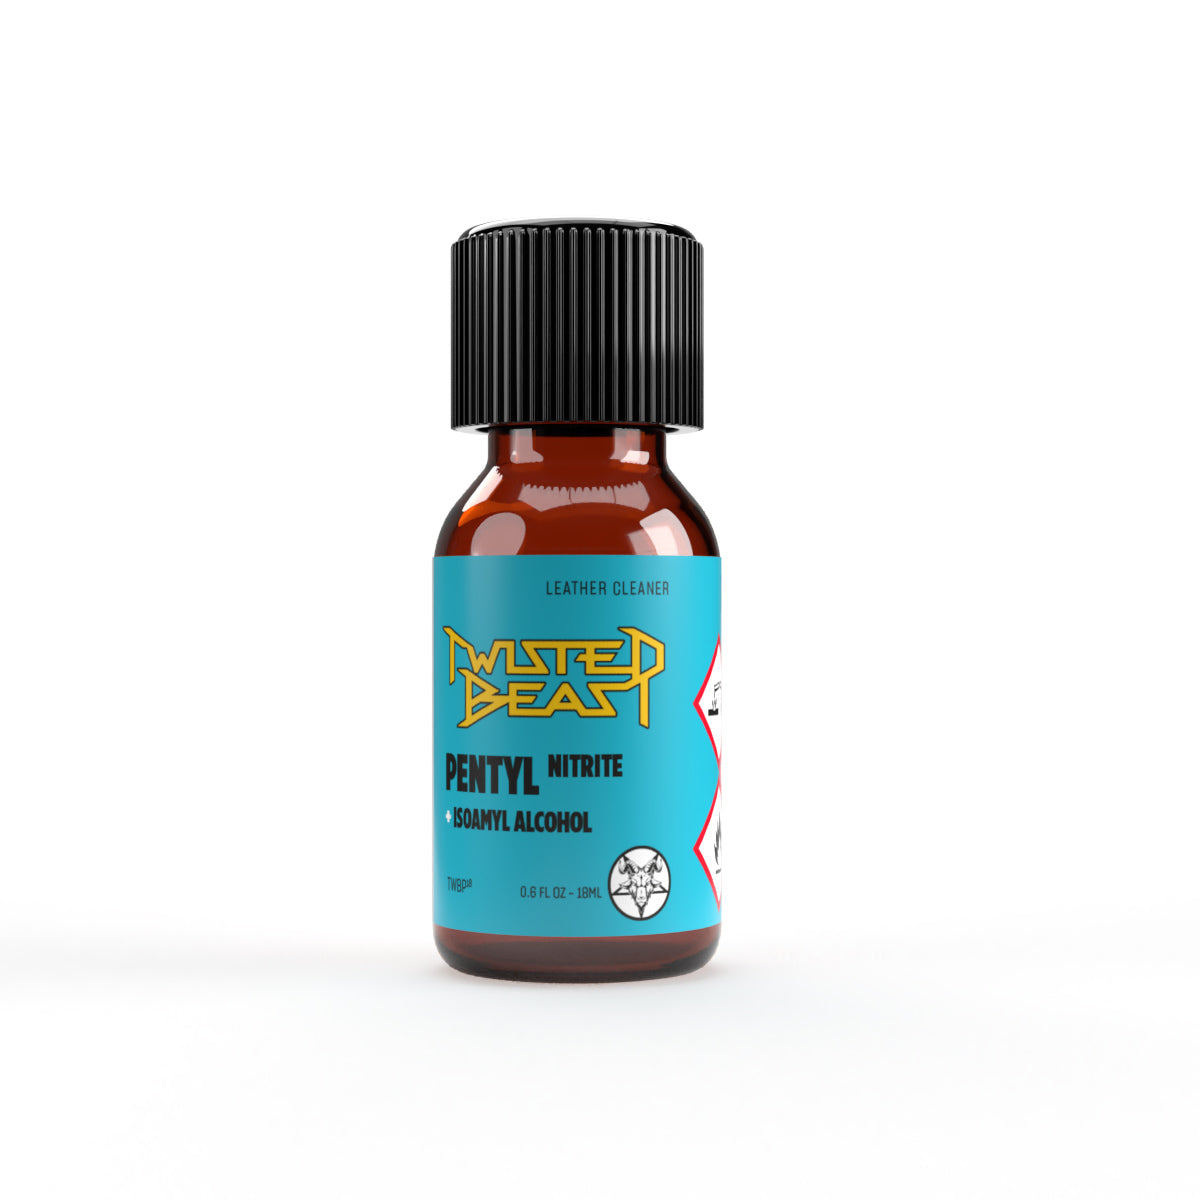 A product photo of a 18ml bottle of Twisted Beast Pentyl poppers.